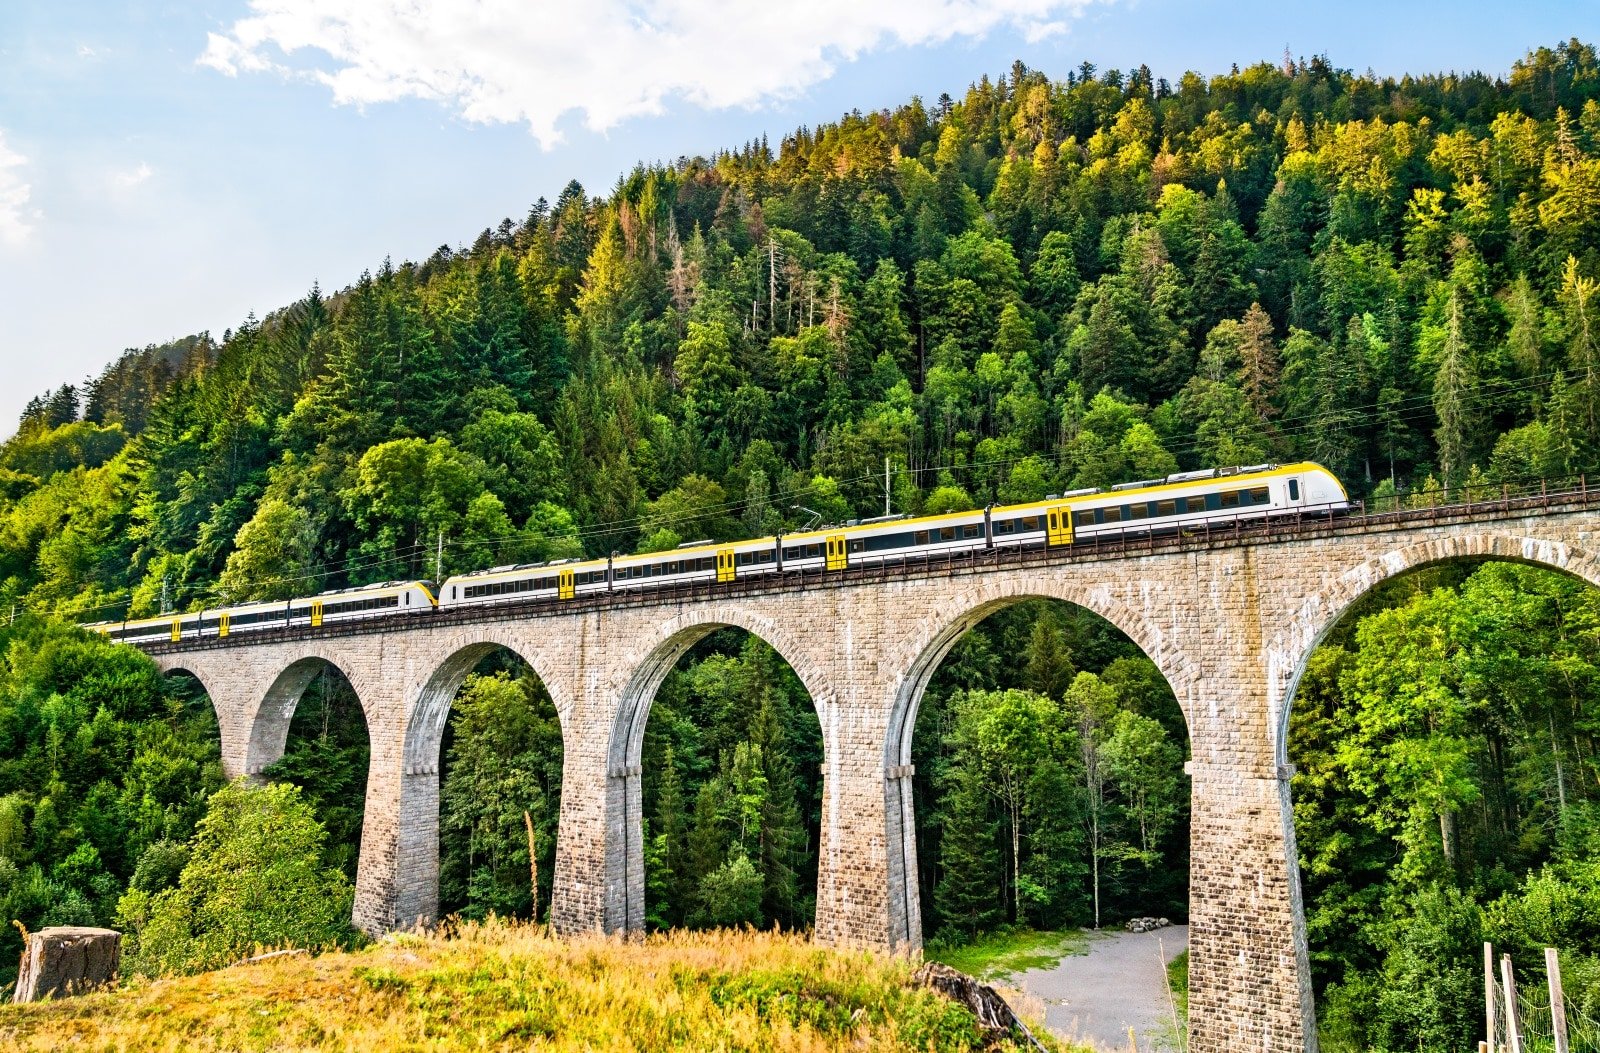 <p><span>The Black Forest Railway, known for its engineering marvels and scenic beauty, offers one of Europe’s most picturesque train journeys. This historic railway line, winding through the heart of the Black Forest, passes through deep valleys, dense woodlands, and charming villages.</span></p> <p><span>The route is characterized by numerous tunnels and viaducts, including the iconic Ravenna Gorge viaduct. Traveling on this railway is like stepping back in time, as the vintage trains and historic stations evoke a bygone era. The journey provides a unique perspective of the Black Forest, showcasing its diverse landscapes and the changing seasons.</span></p> <p><span>Whether shrouded in winter snow or basked in summer sunlight, the views from the train are always captivating. The Black Forest Railway captures the essence and beauty of this enchanting region.</span></p> <p><b>Insider’s Tip: </b><span>Sit on the right side of the train for the best views when traveling from Offenburg to Konstanz.</span></p> <p><b>How To Get There: </b><span>The railway connects Offenburg in the north to Konstanz in the south.</span></p> <p><b>Best Time To Travel: </b><span>Year-round, as each season offers a different perspective of the forest’s beauty.</span></p>